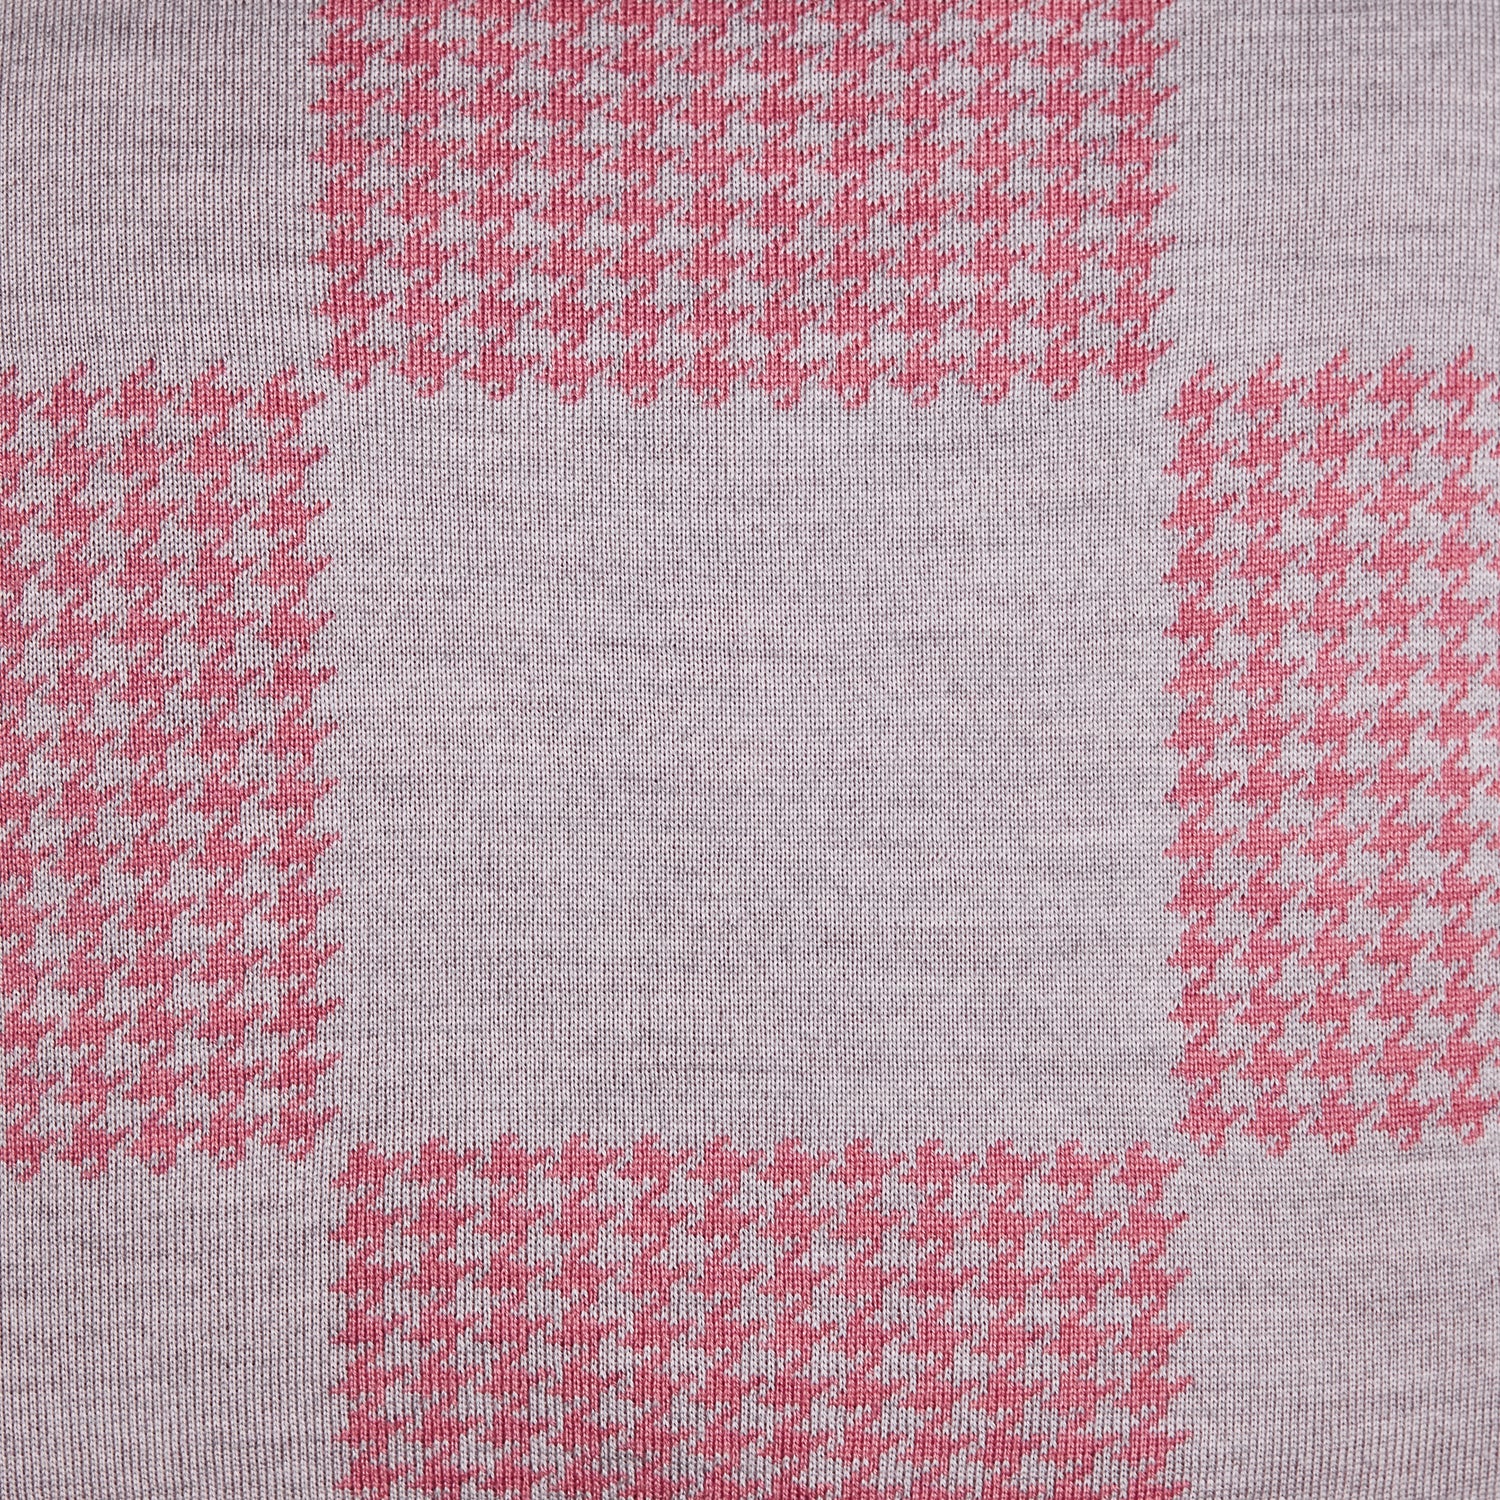 Squared Patch Houndstooth Candy Pink and Pearl Grey Cushion